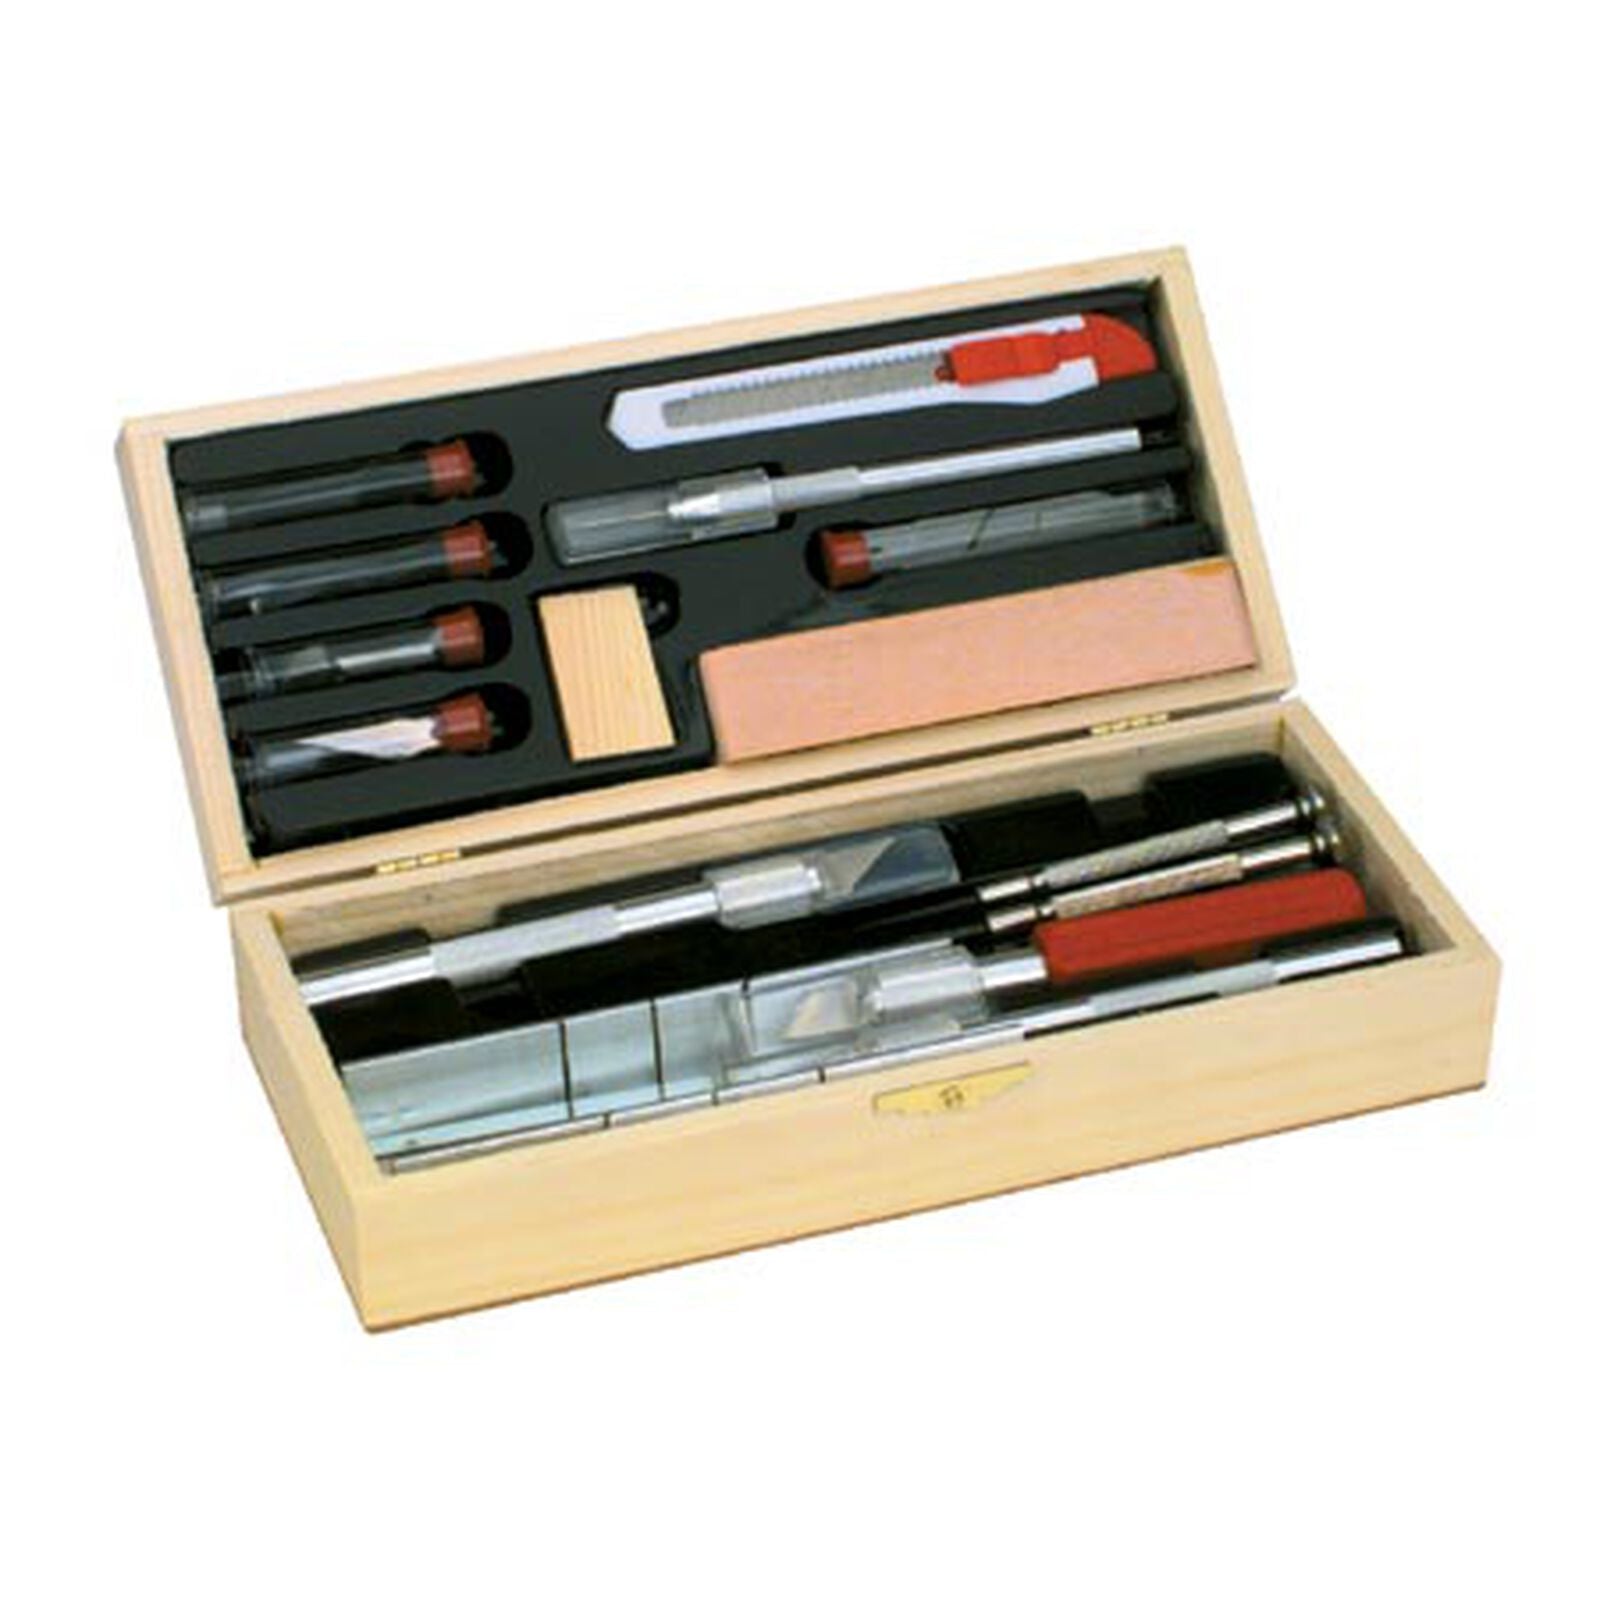 EXCEL 44286 Deluxe Knife Set, Boxed